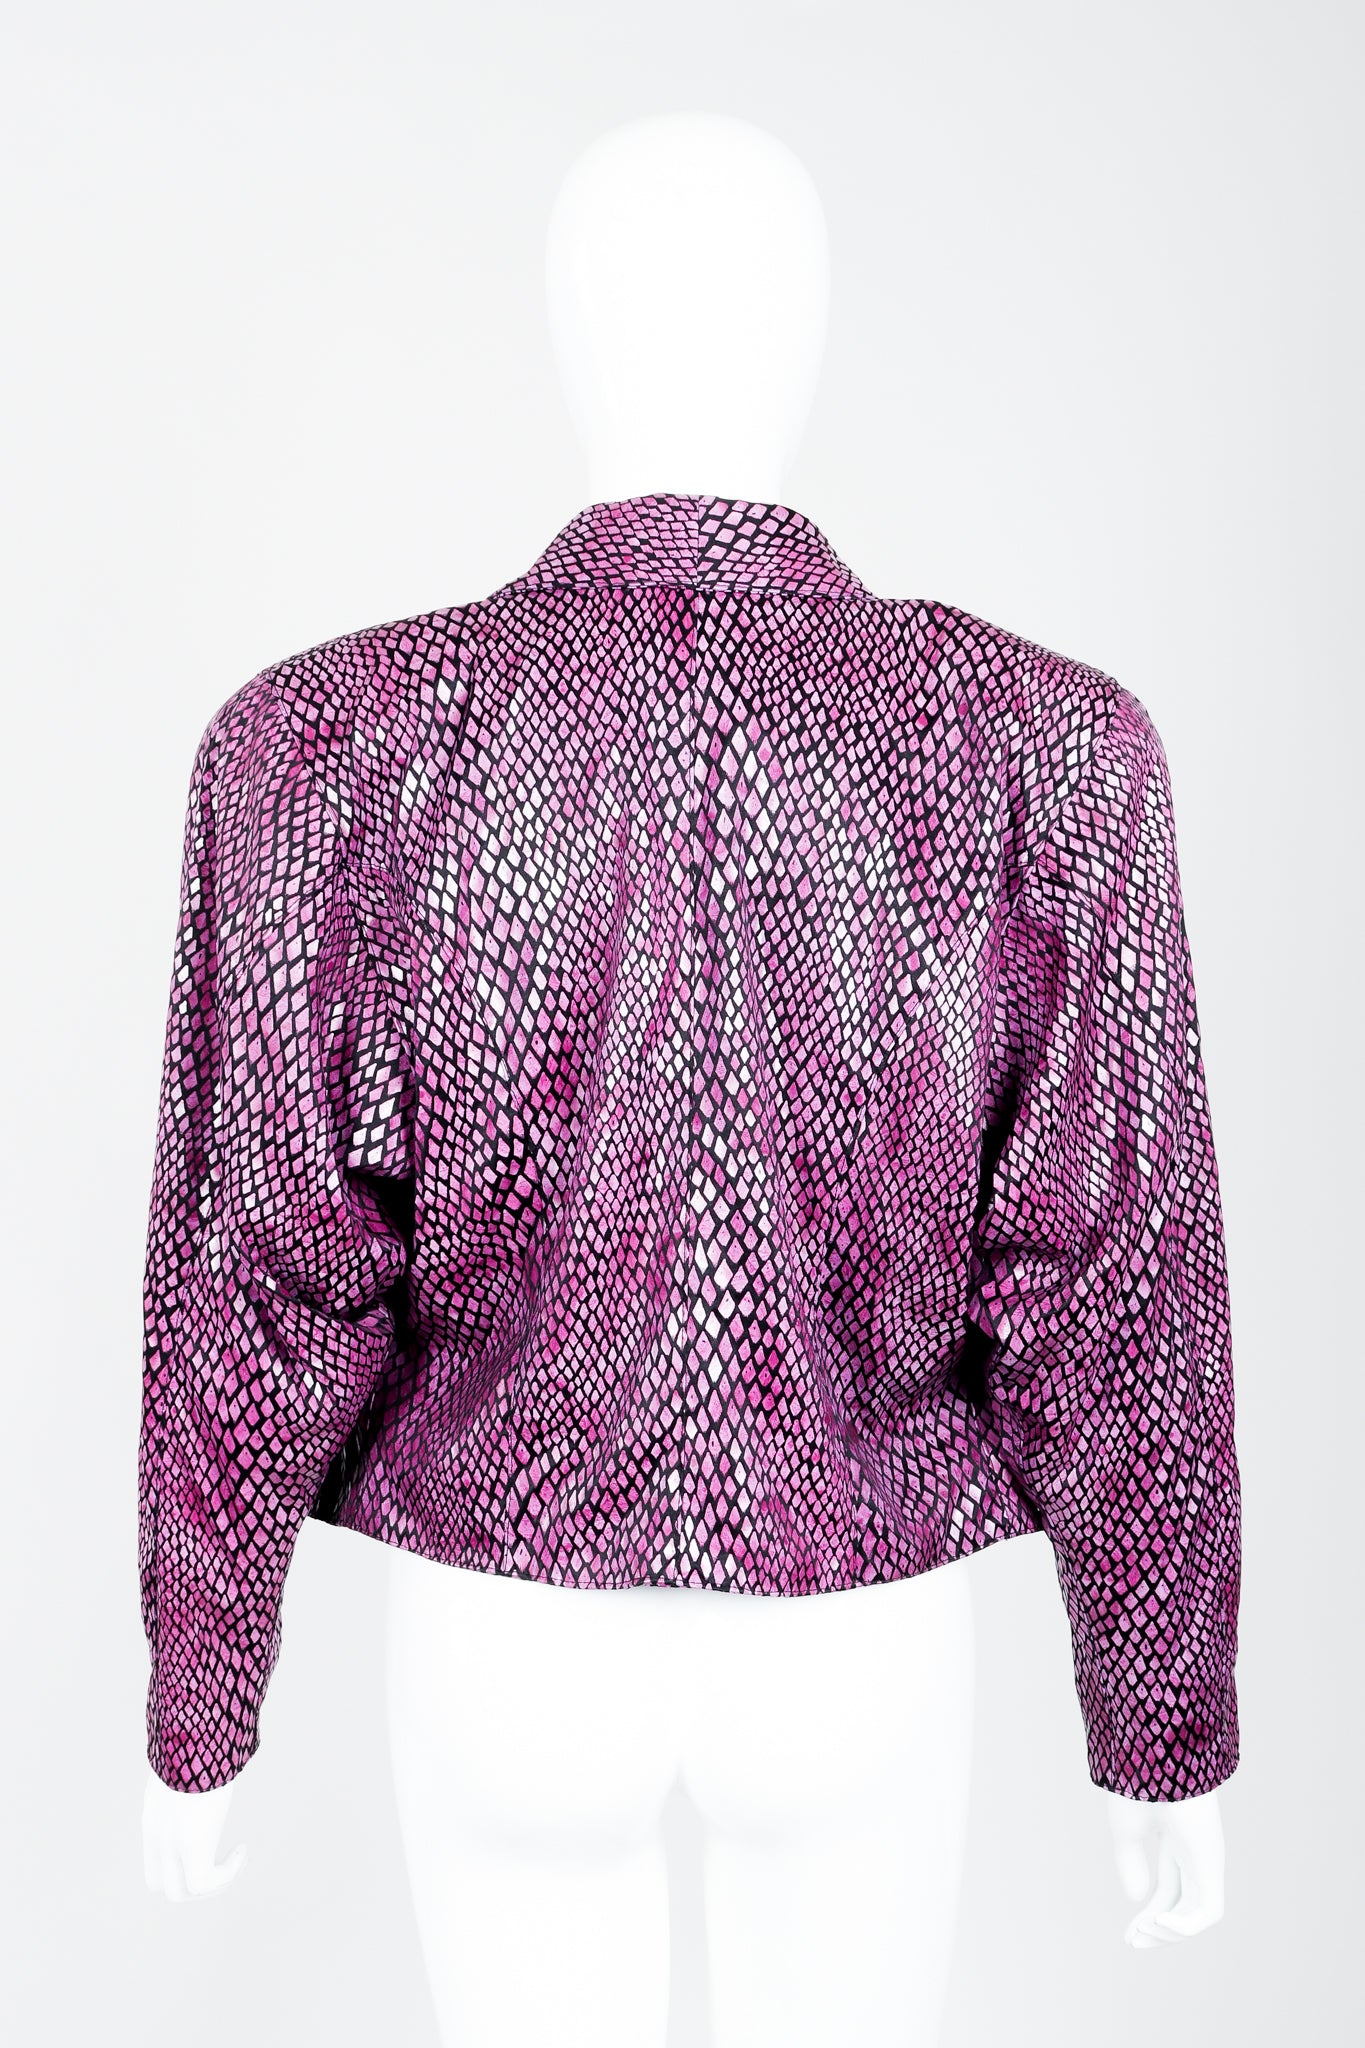 Vintage Marpelli by Udo Reptilian Jacket on Mannequin back at Recess